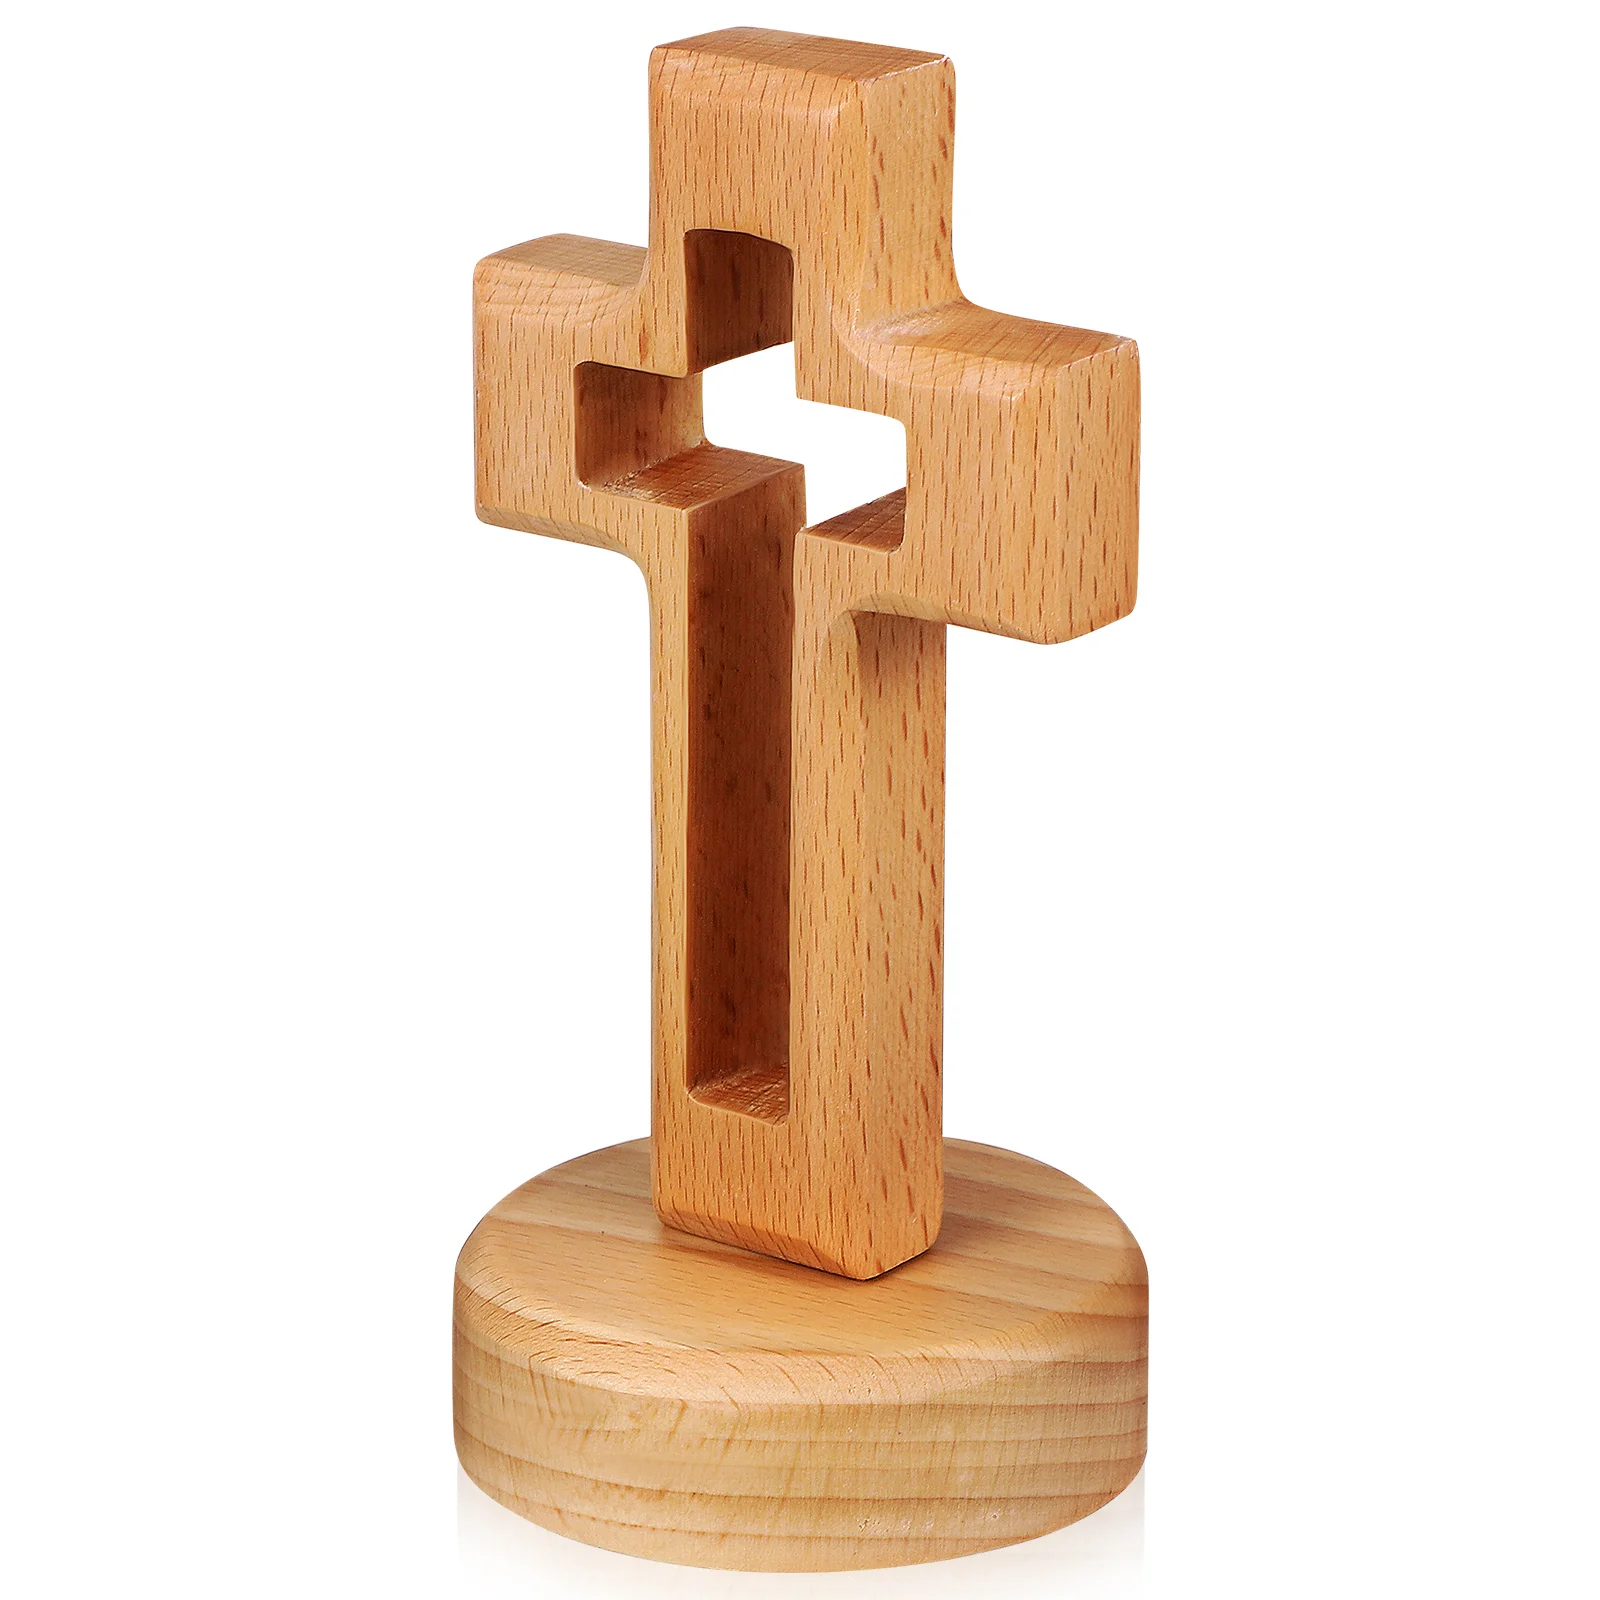 

Tabletop Decor Cross Church Decoration Wooden for Crafts Ornament Decorative with Base